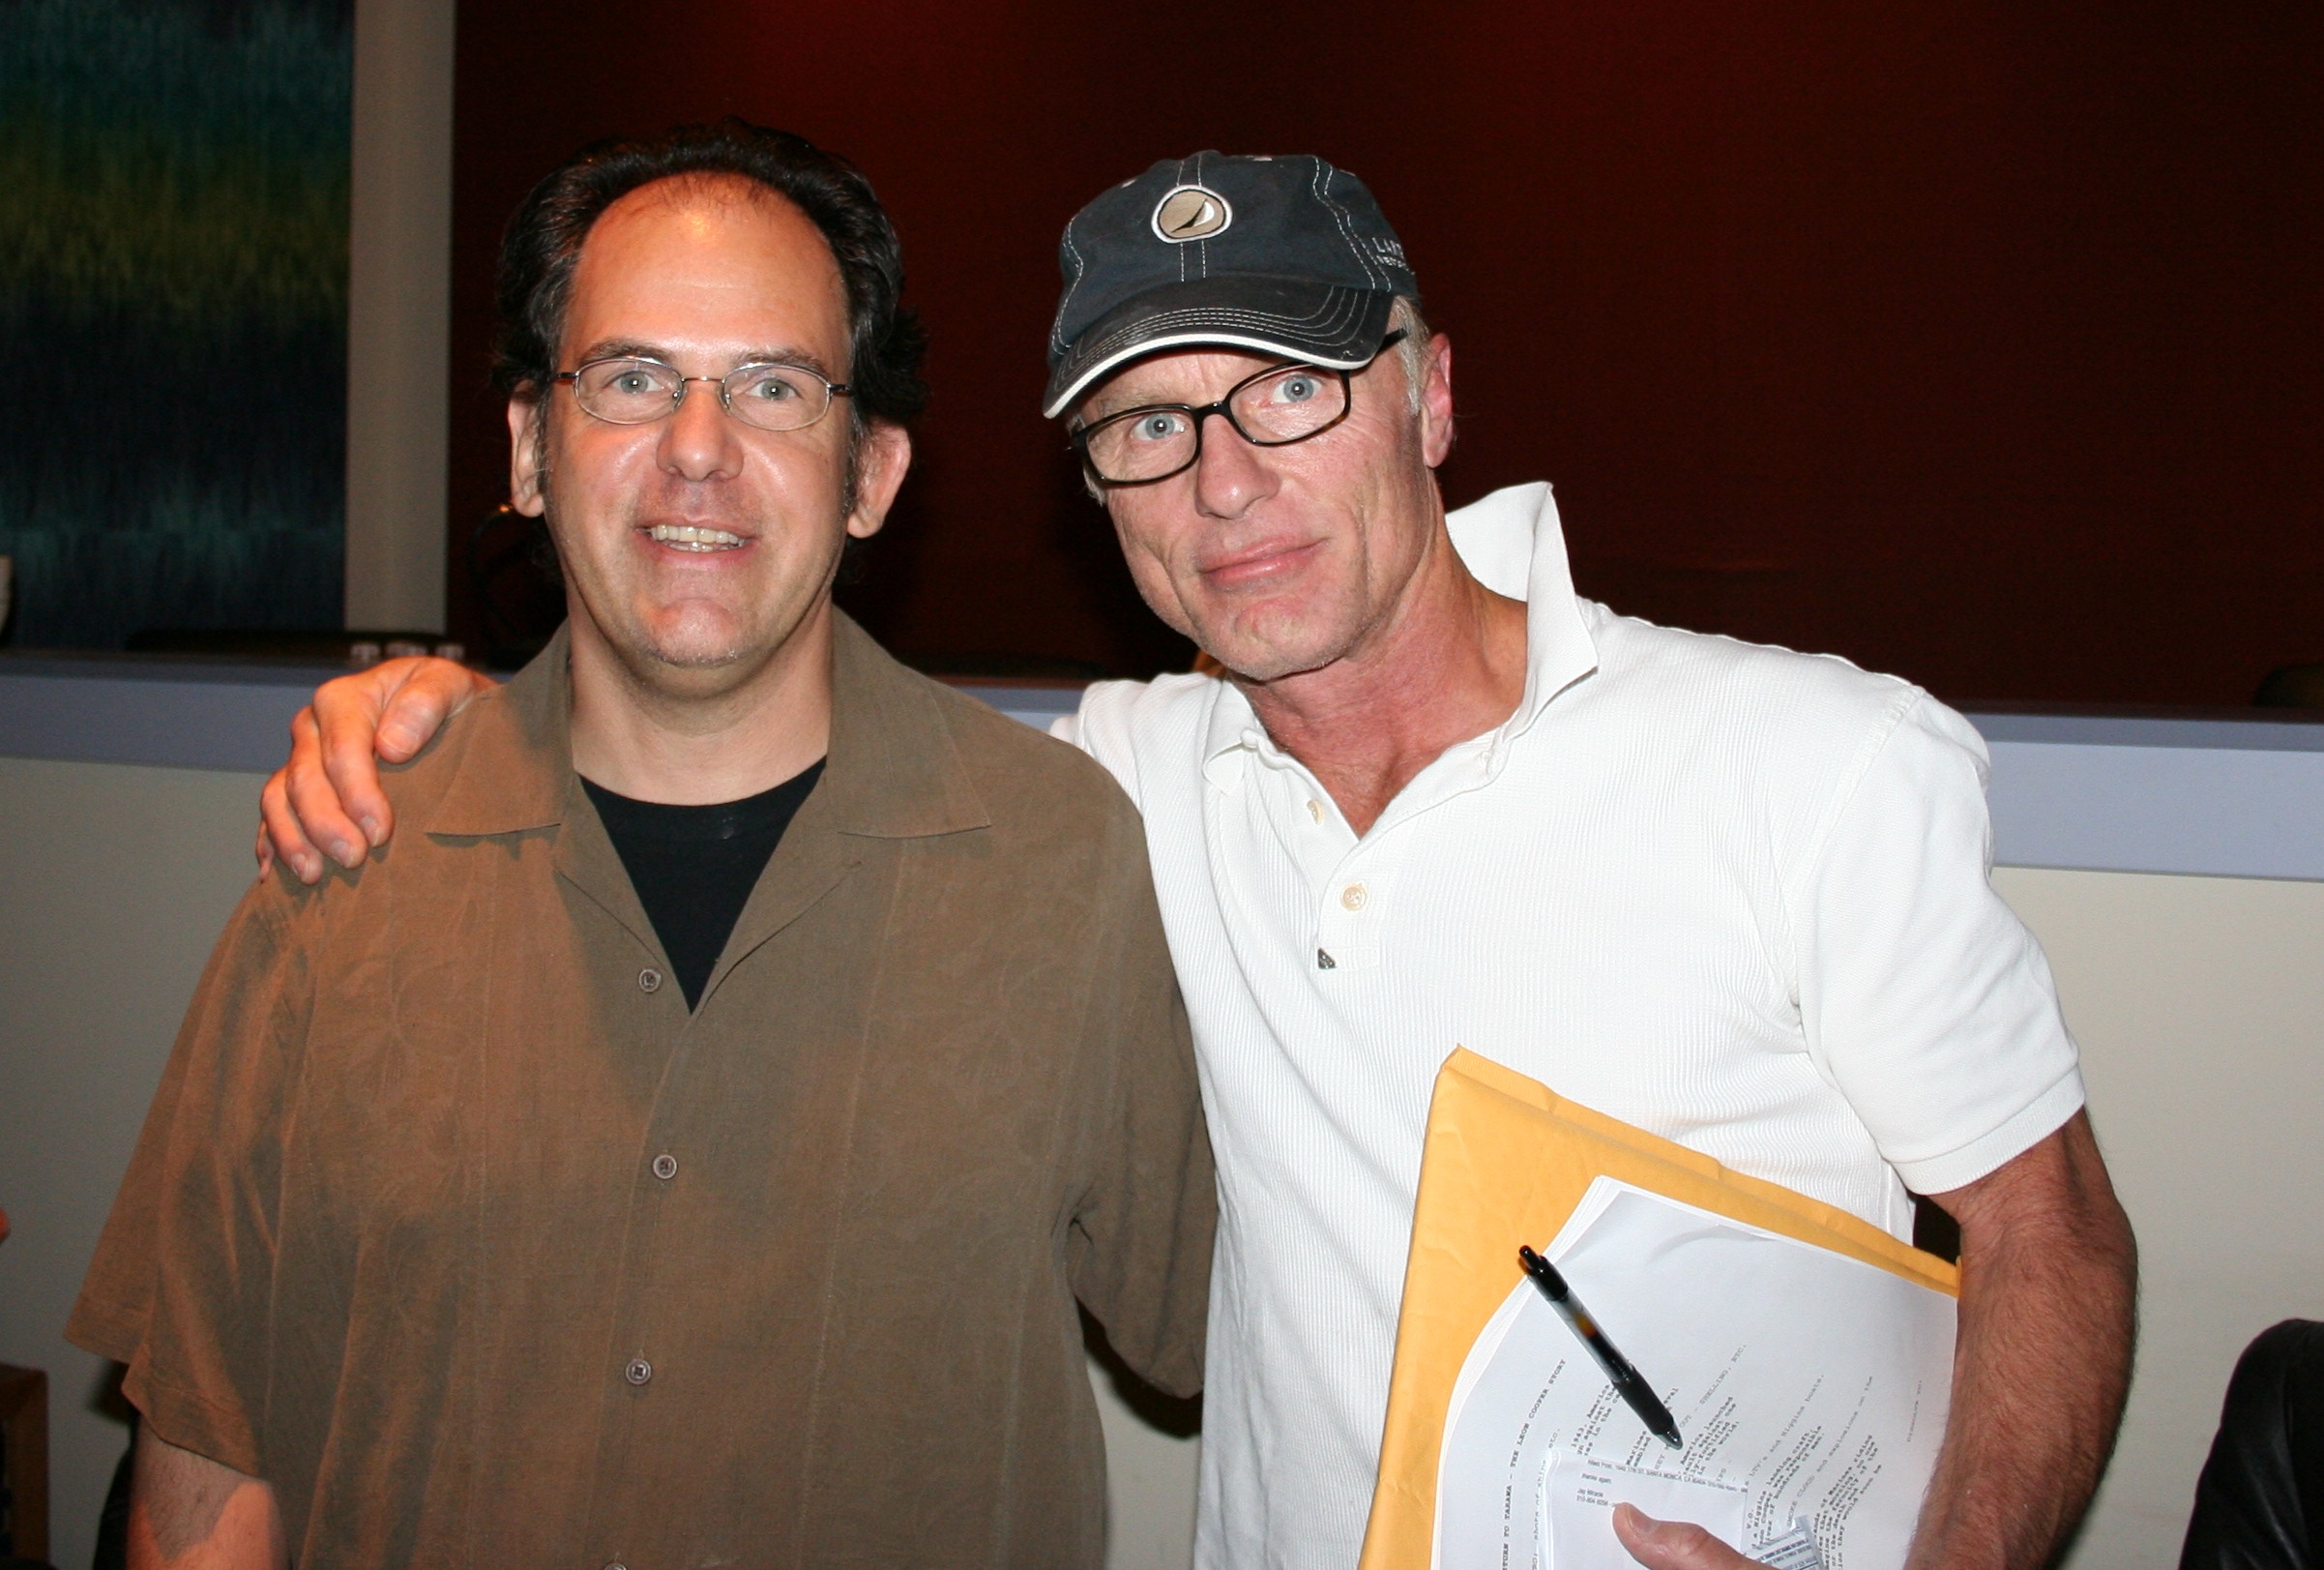 Woody Woodhall with Ed Harris recording voice over for a documentary film.